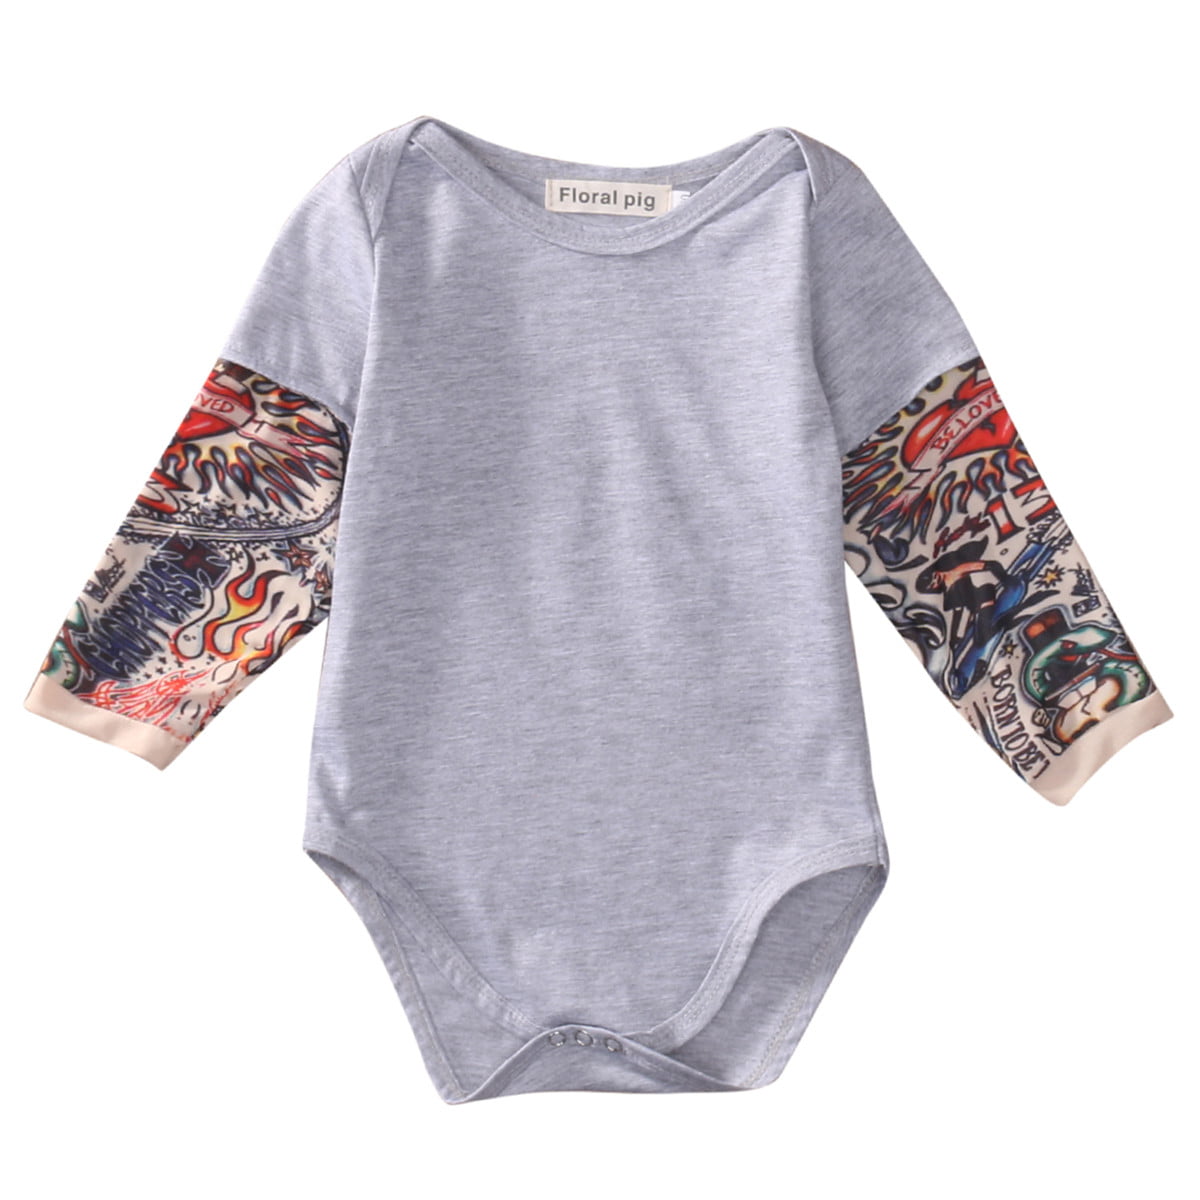 Funiup Baby Boby Girl Tattoo Sleeve Romper Nine Month on Inside Long Sleeve Bodysuit Clothes Infant Baby Boys Jumpsuit